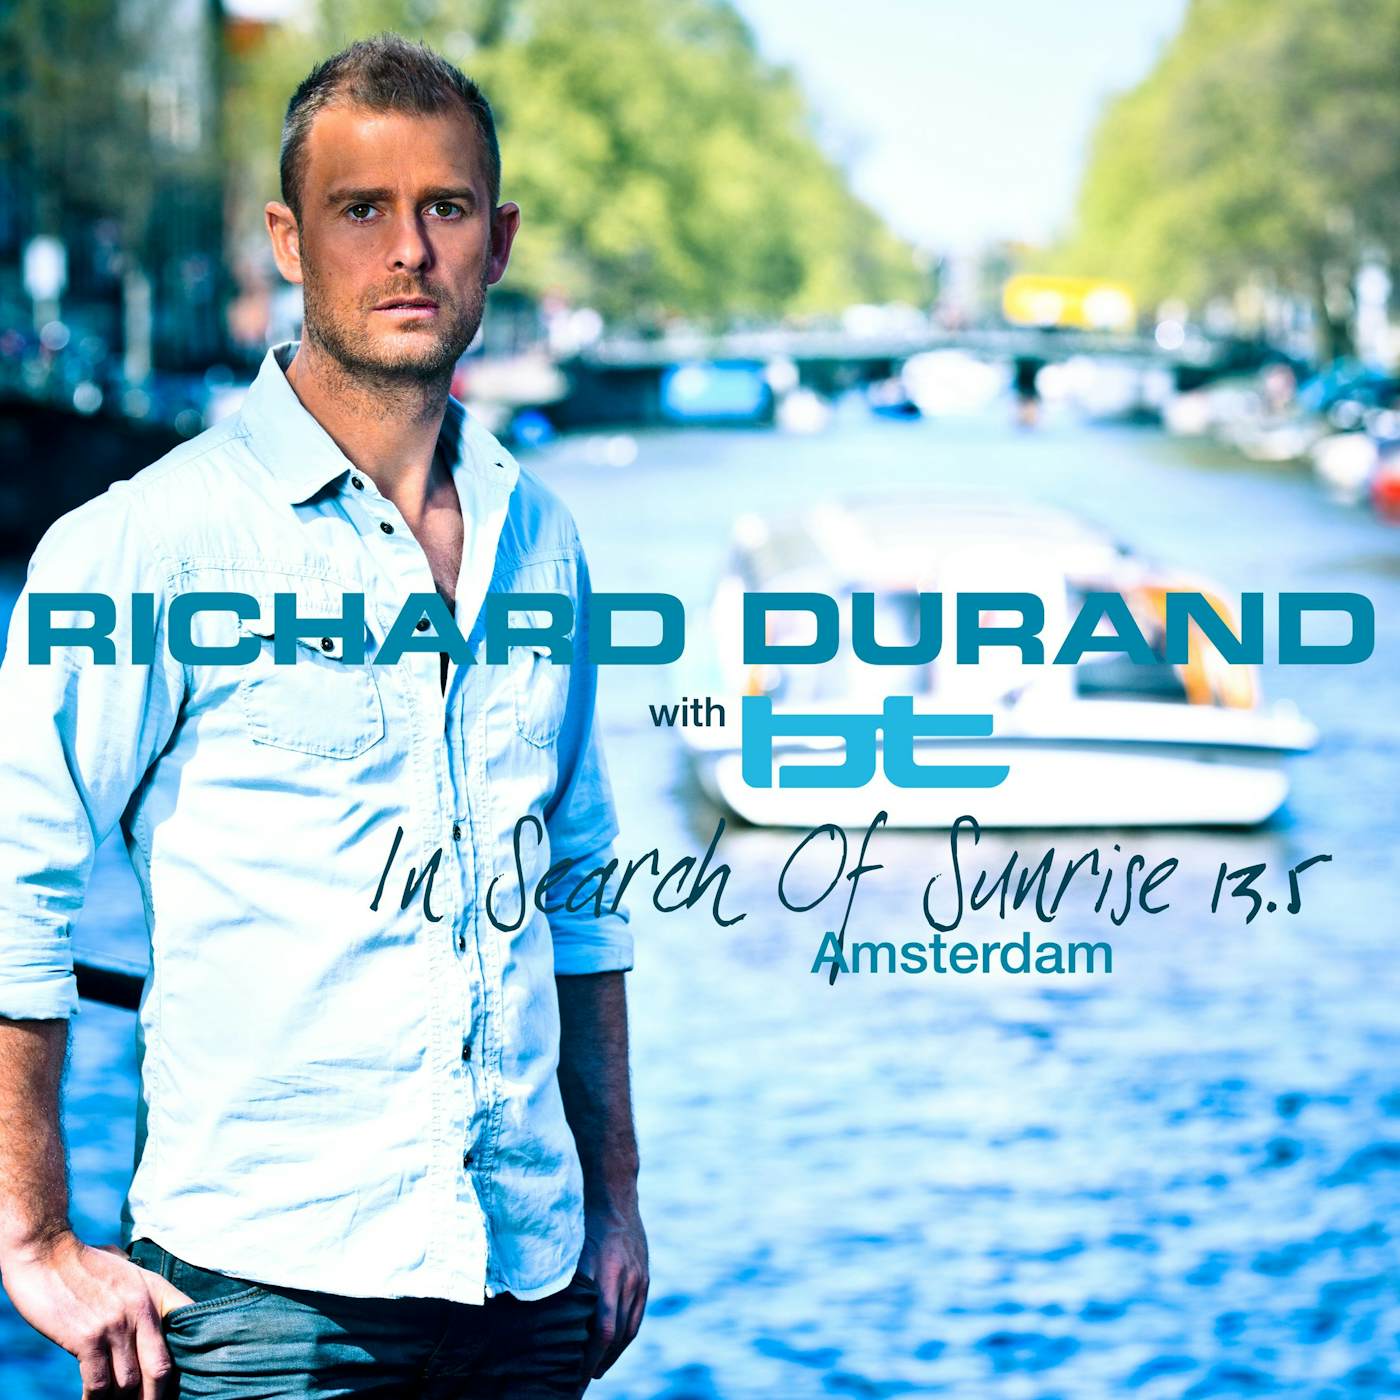 BT Richard Durand - In Search Of Sunrise 13.5 Amsterdam